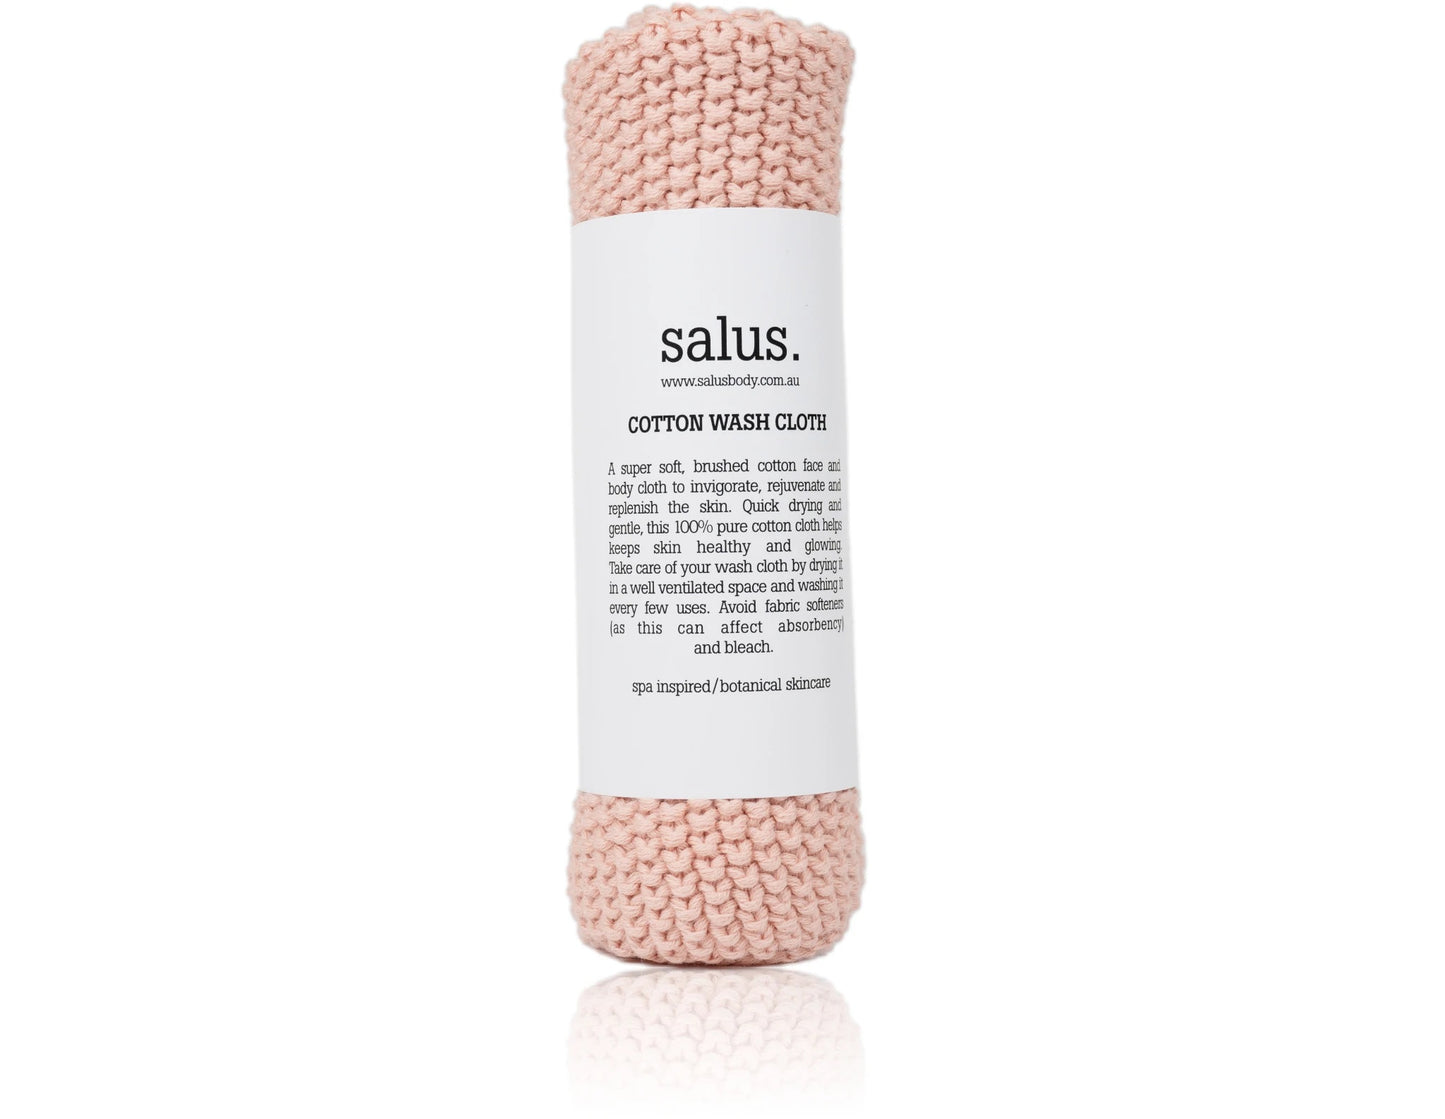 Packaged pink cotton wash cloth from Salus